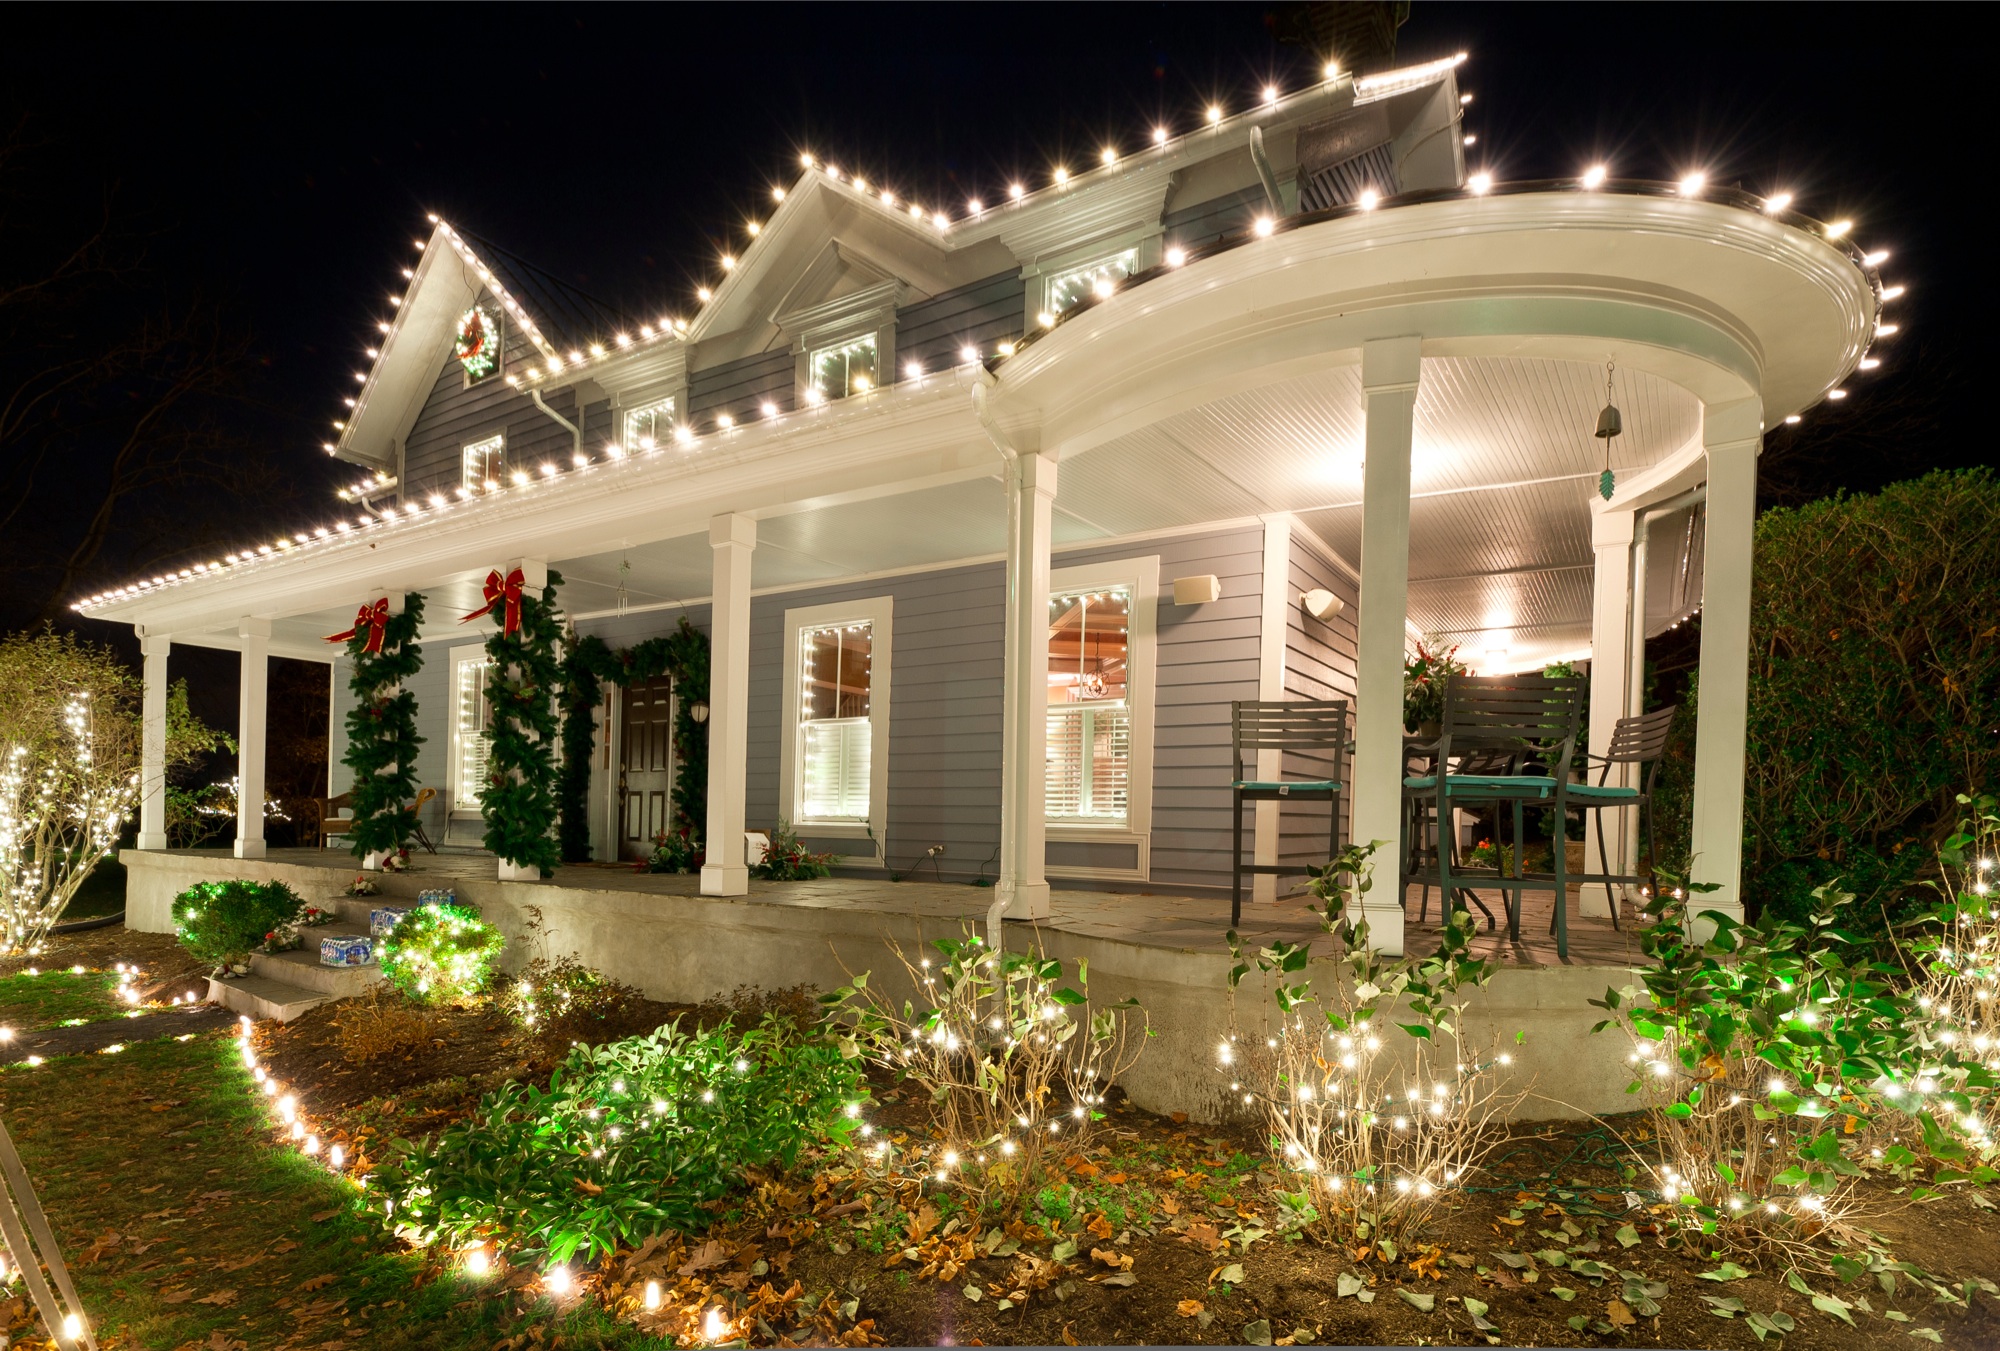 Lighting Trends for Your Home’s Exterior - 78209 Magazine